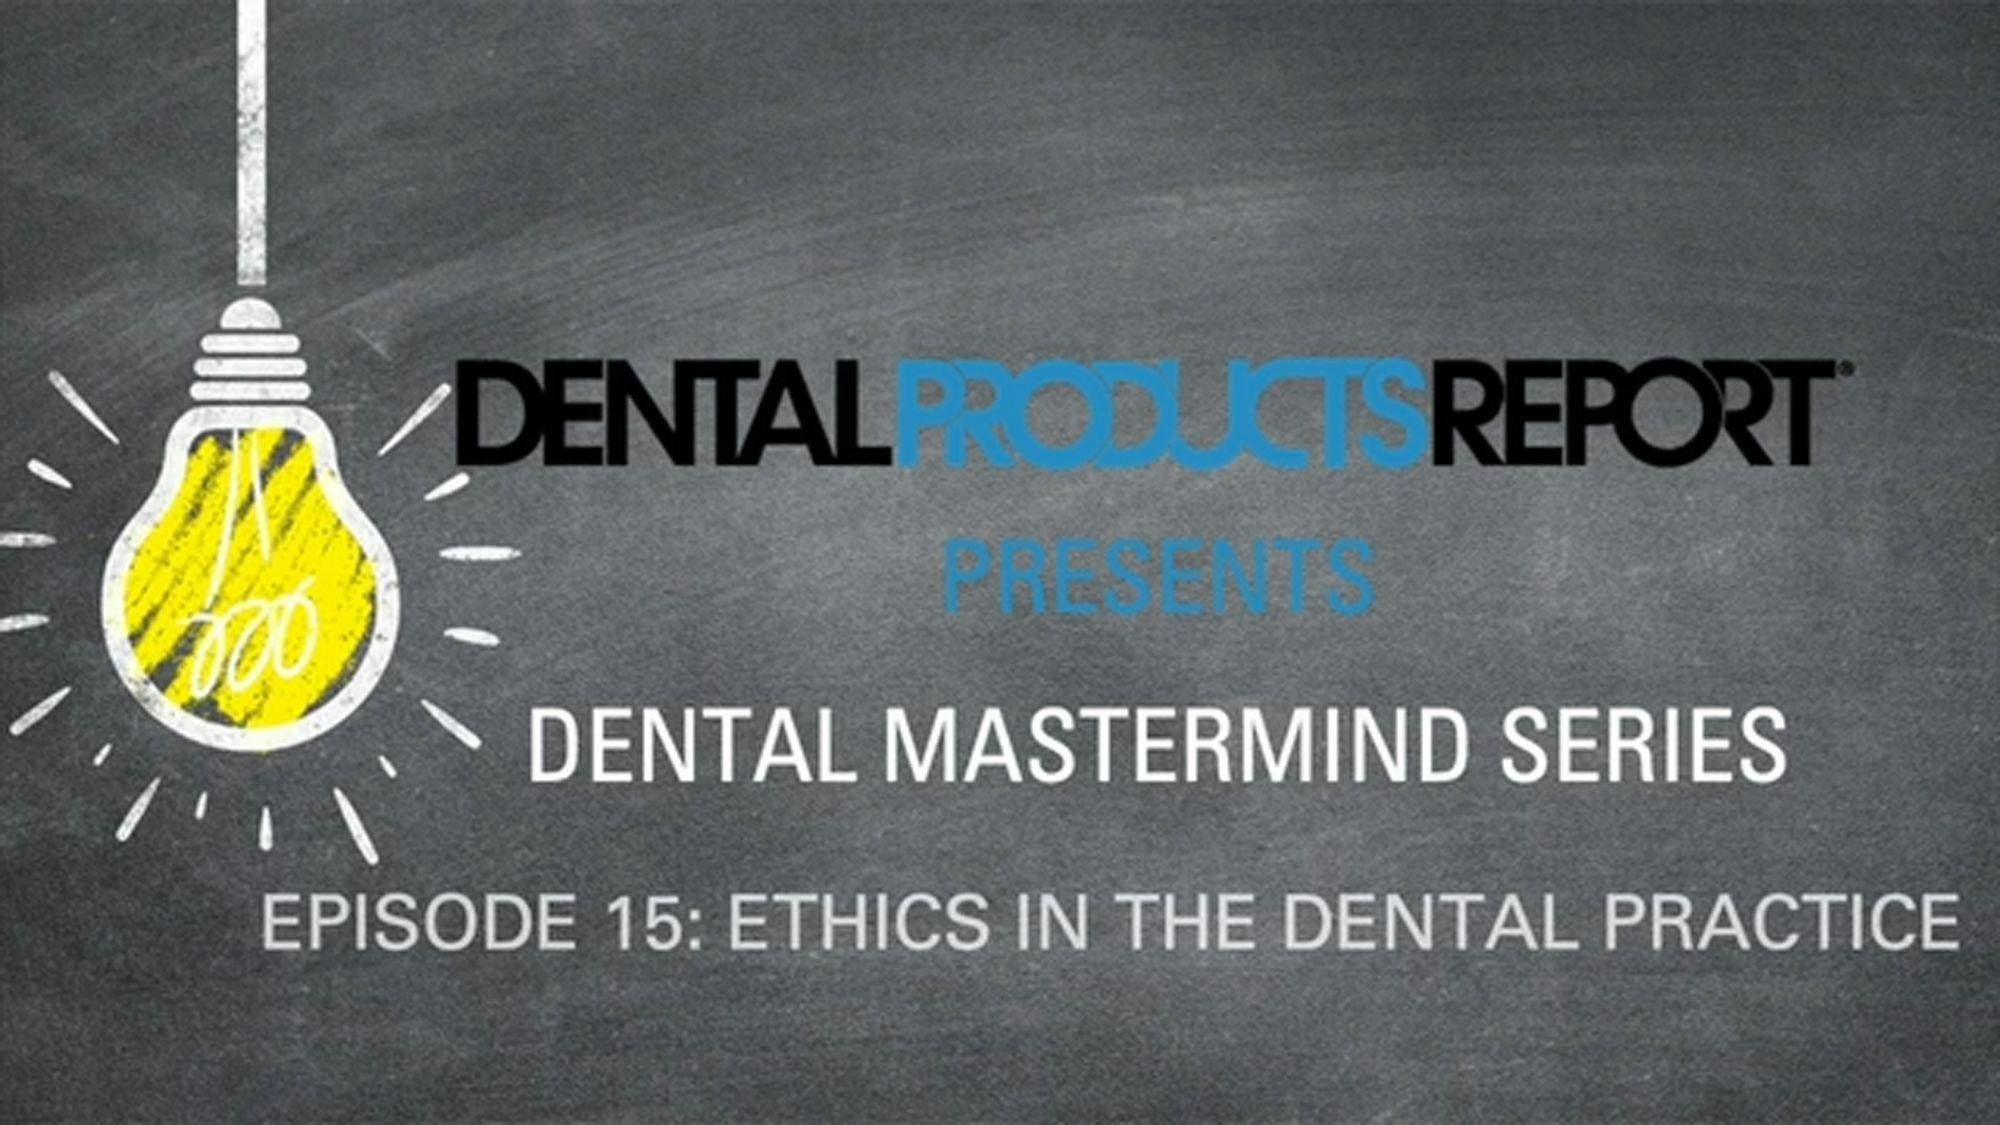 Mastermind - Episode 15 - Ethics in a Dental Practice